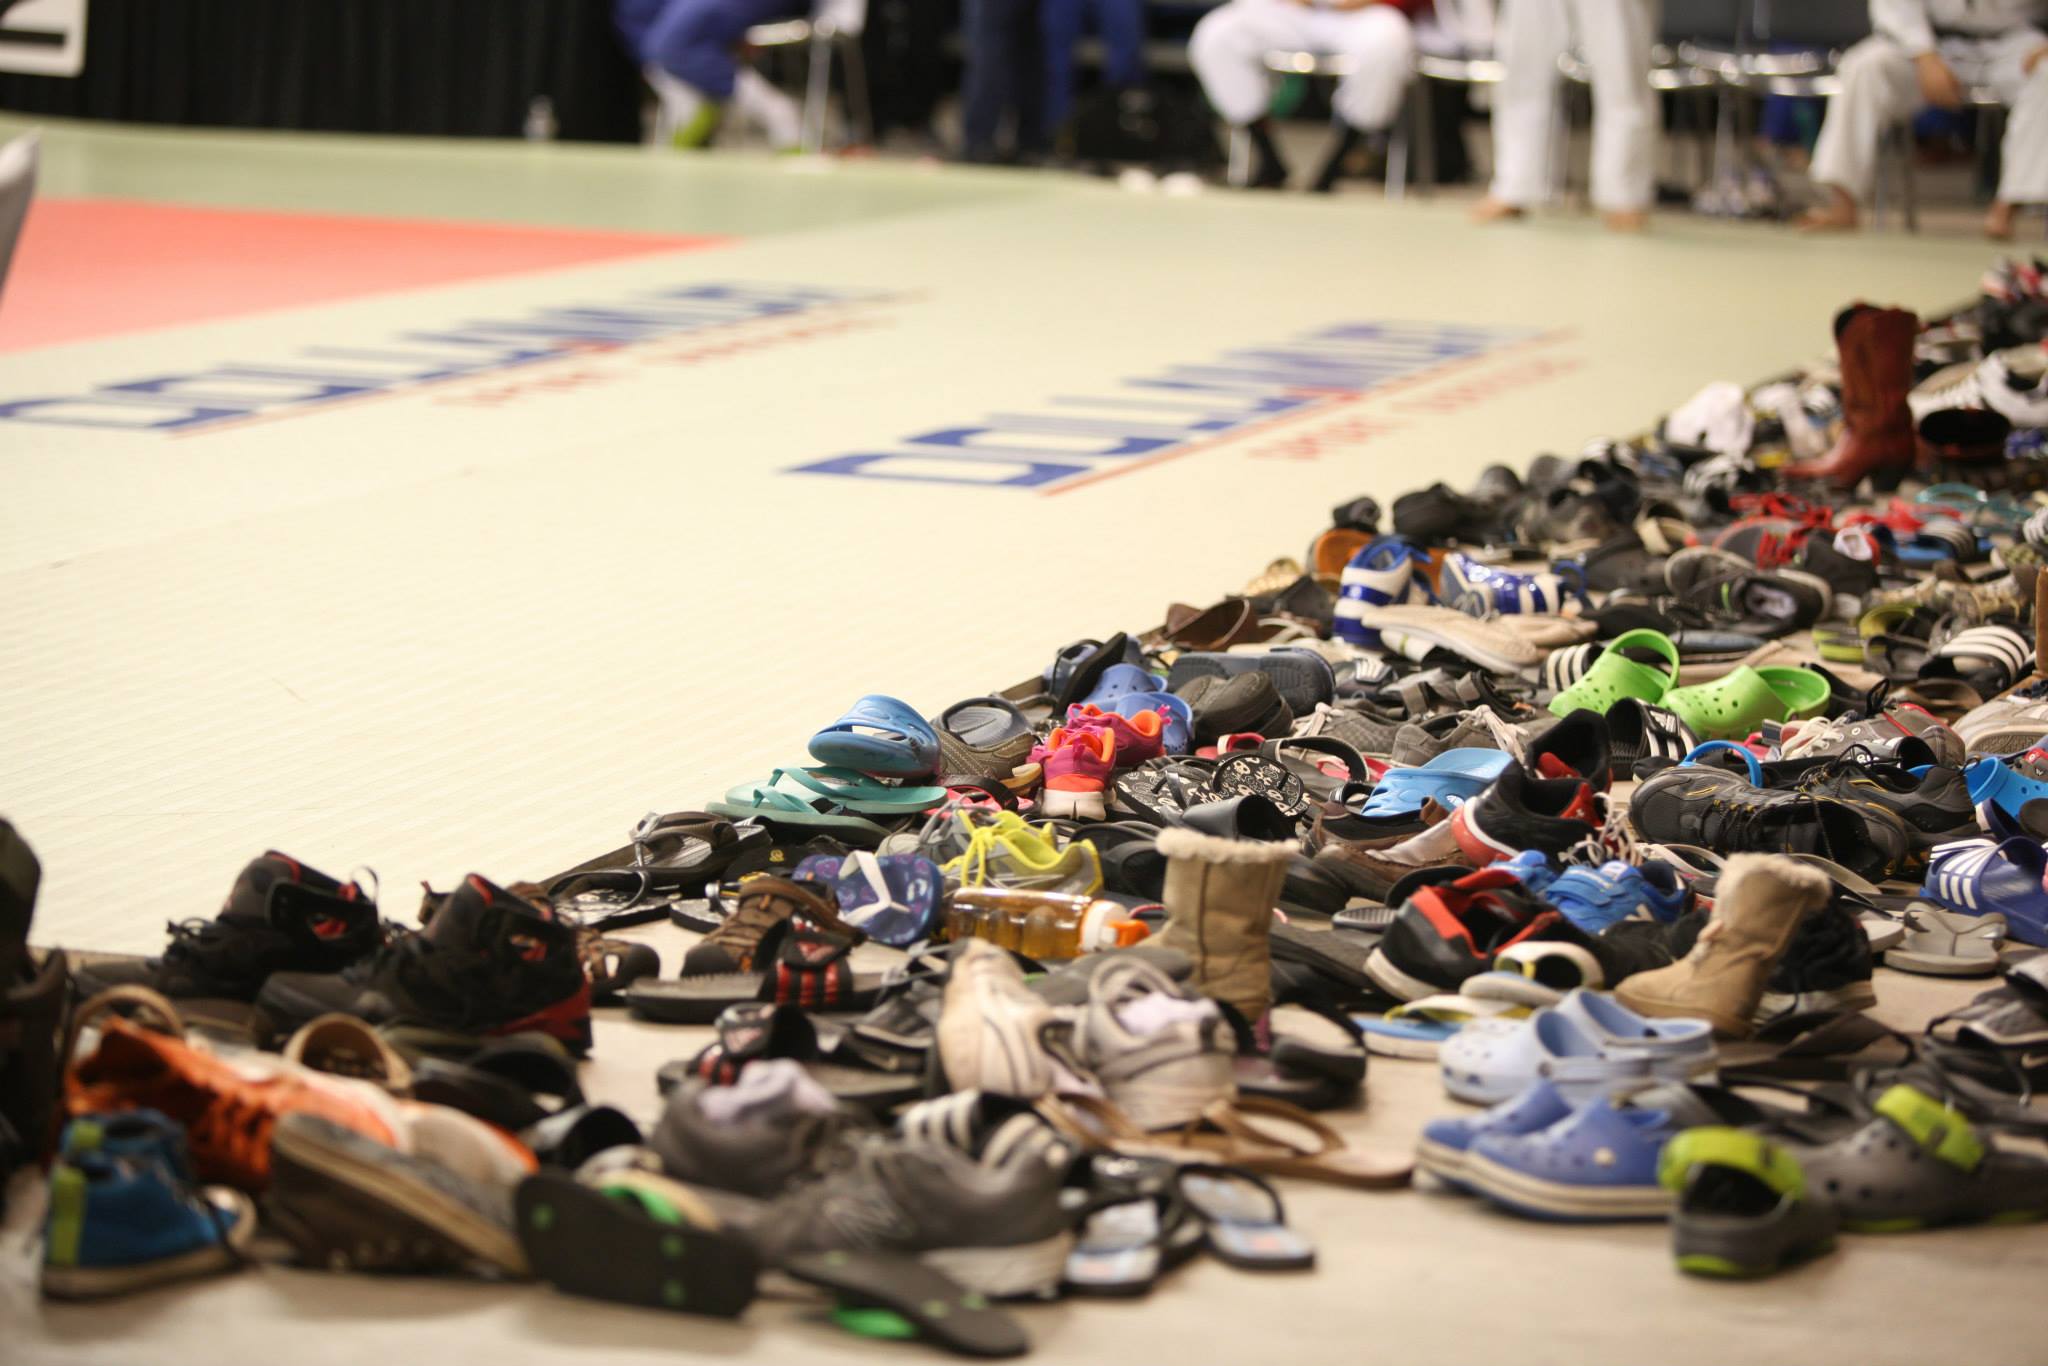 10 Reasons to Leave a BJJ Academy